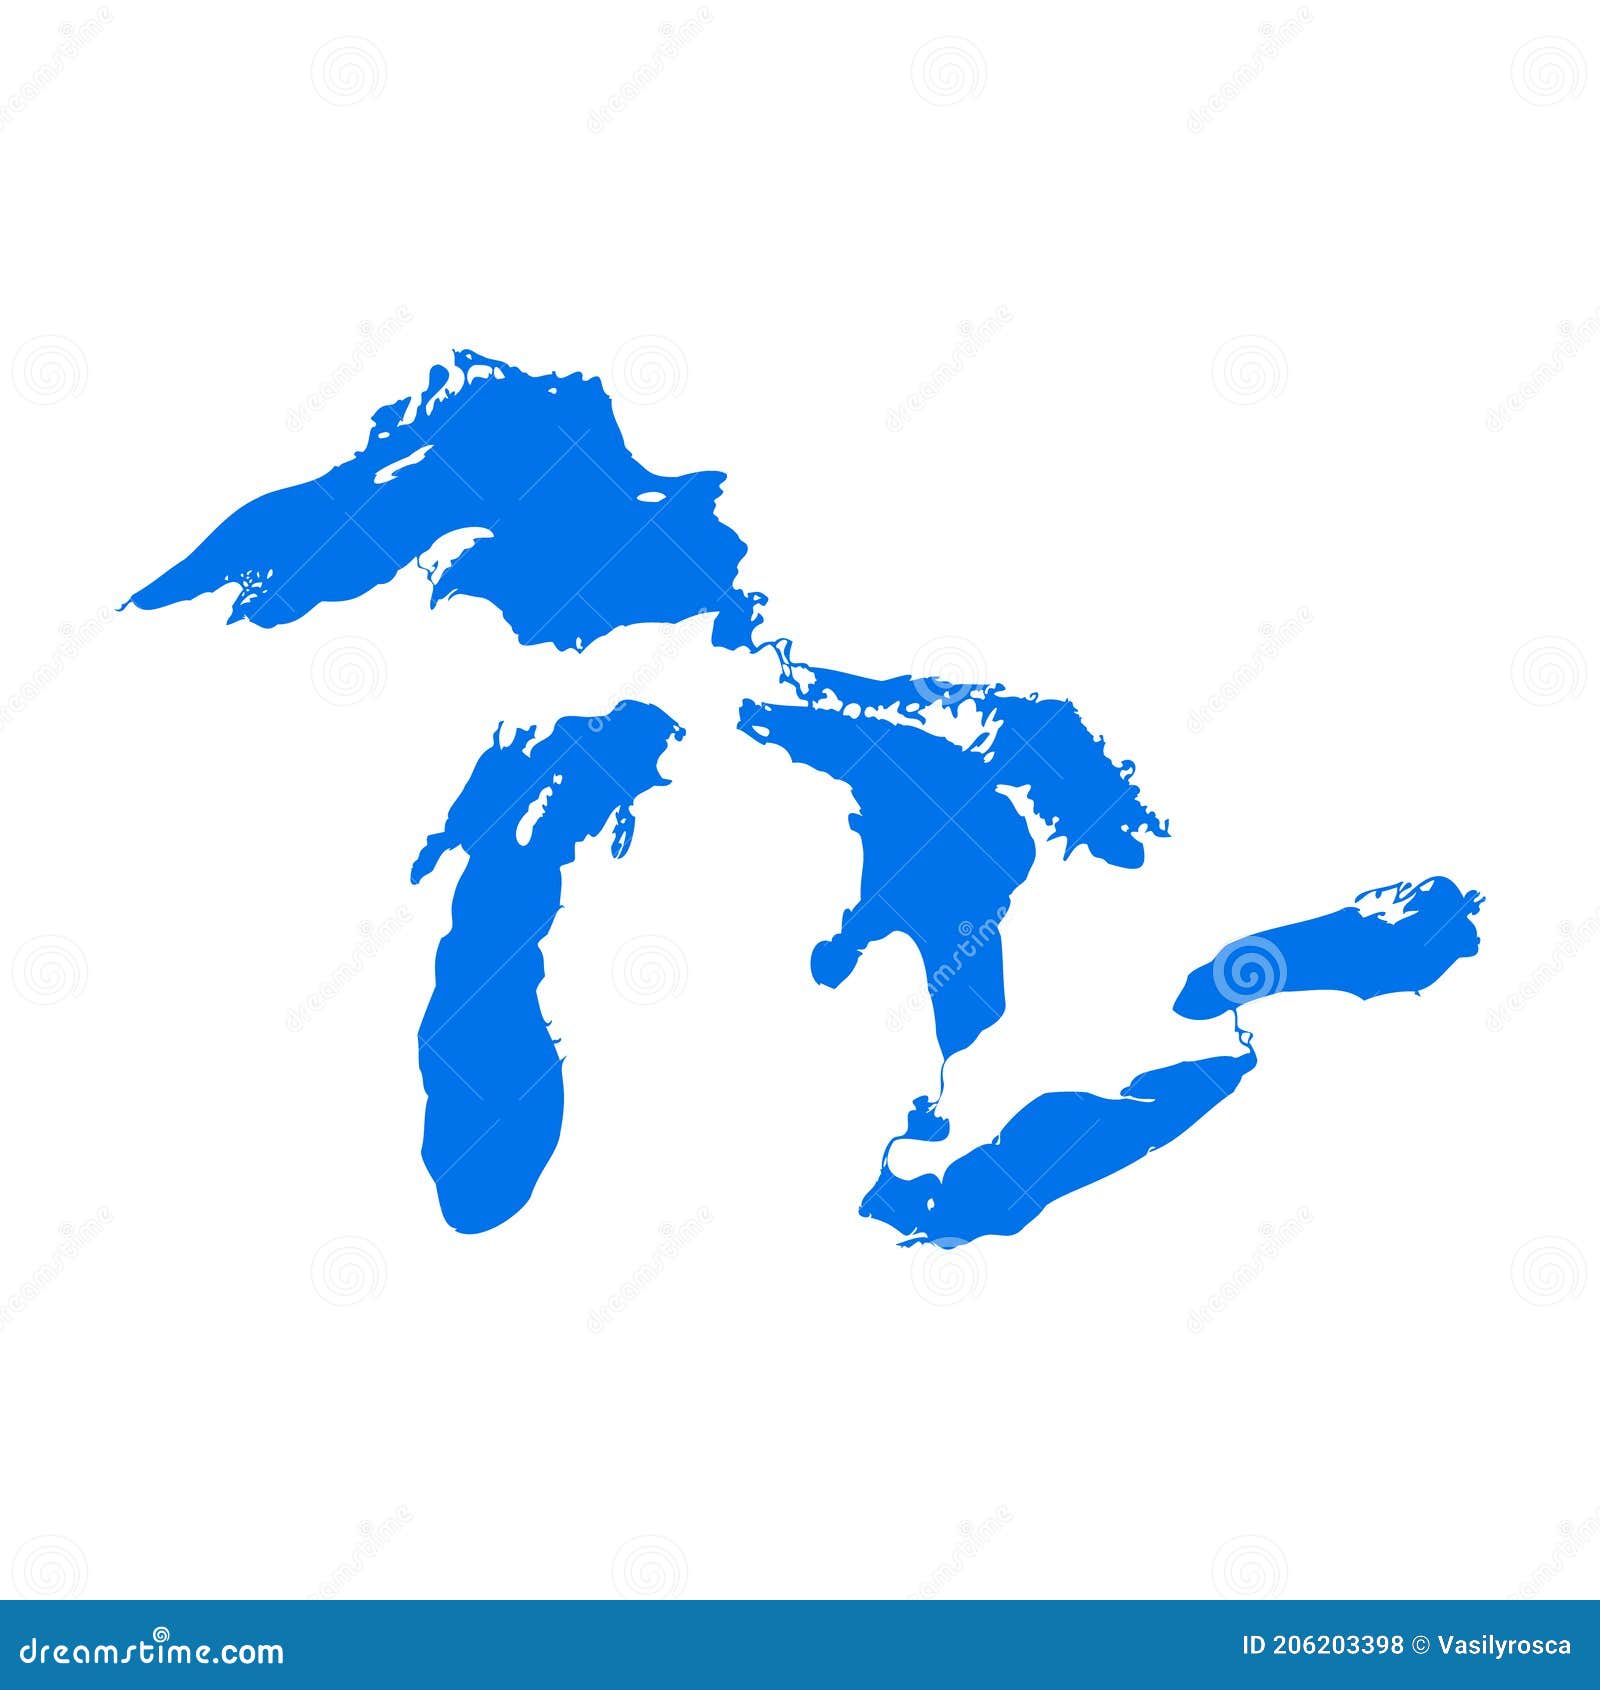 Great Lakes Michigan Great Lakes Silhouette Michigan Outline Water 